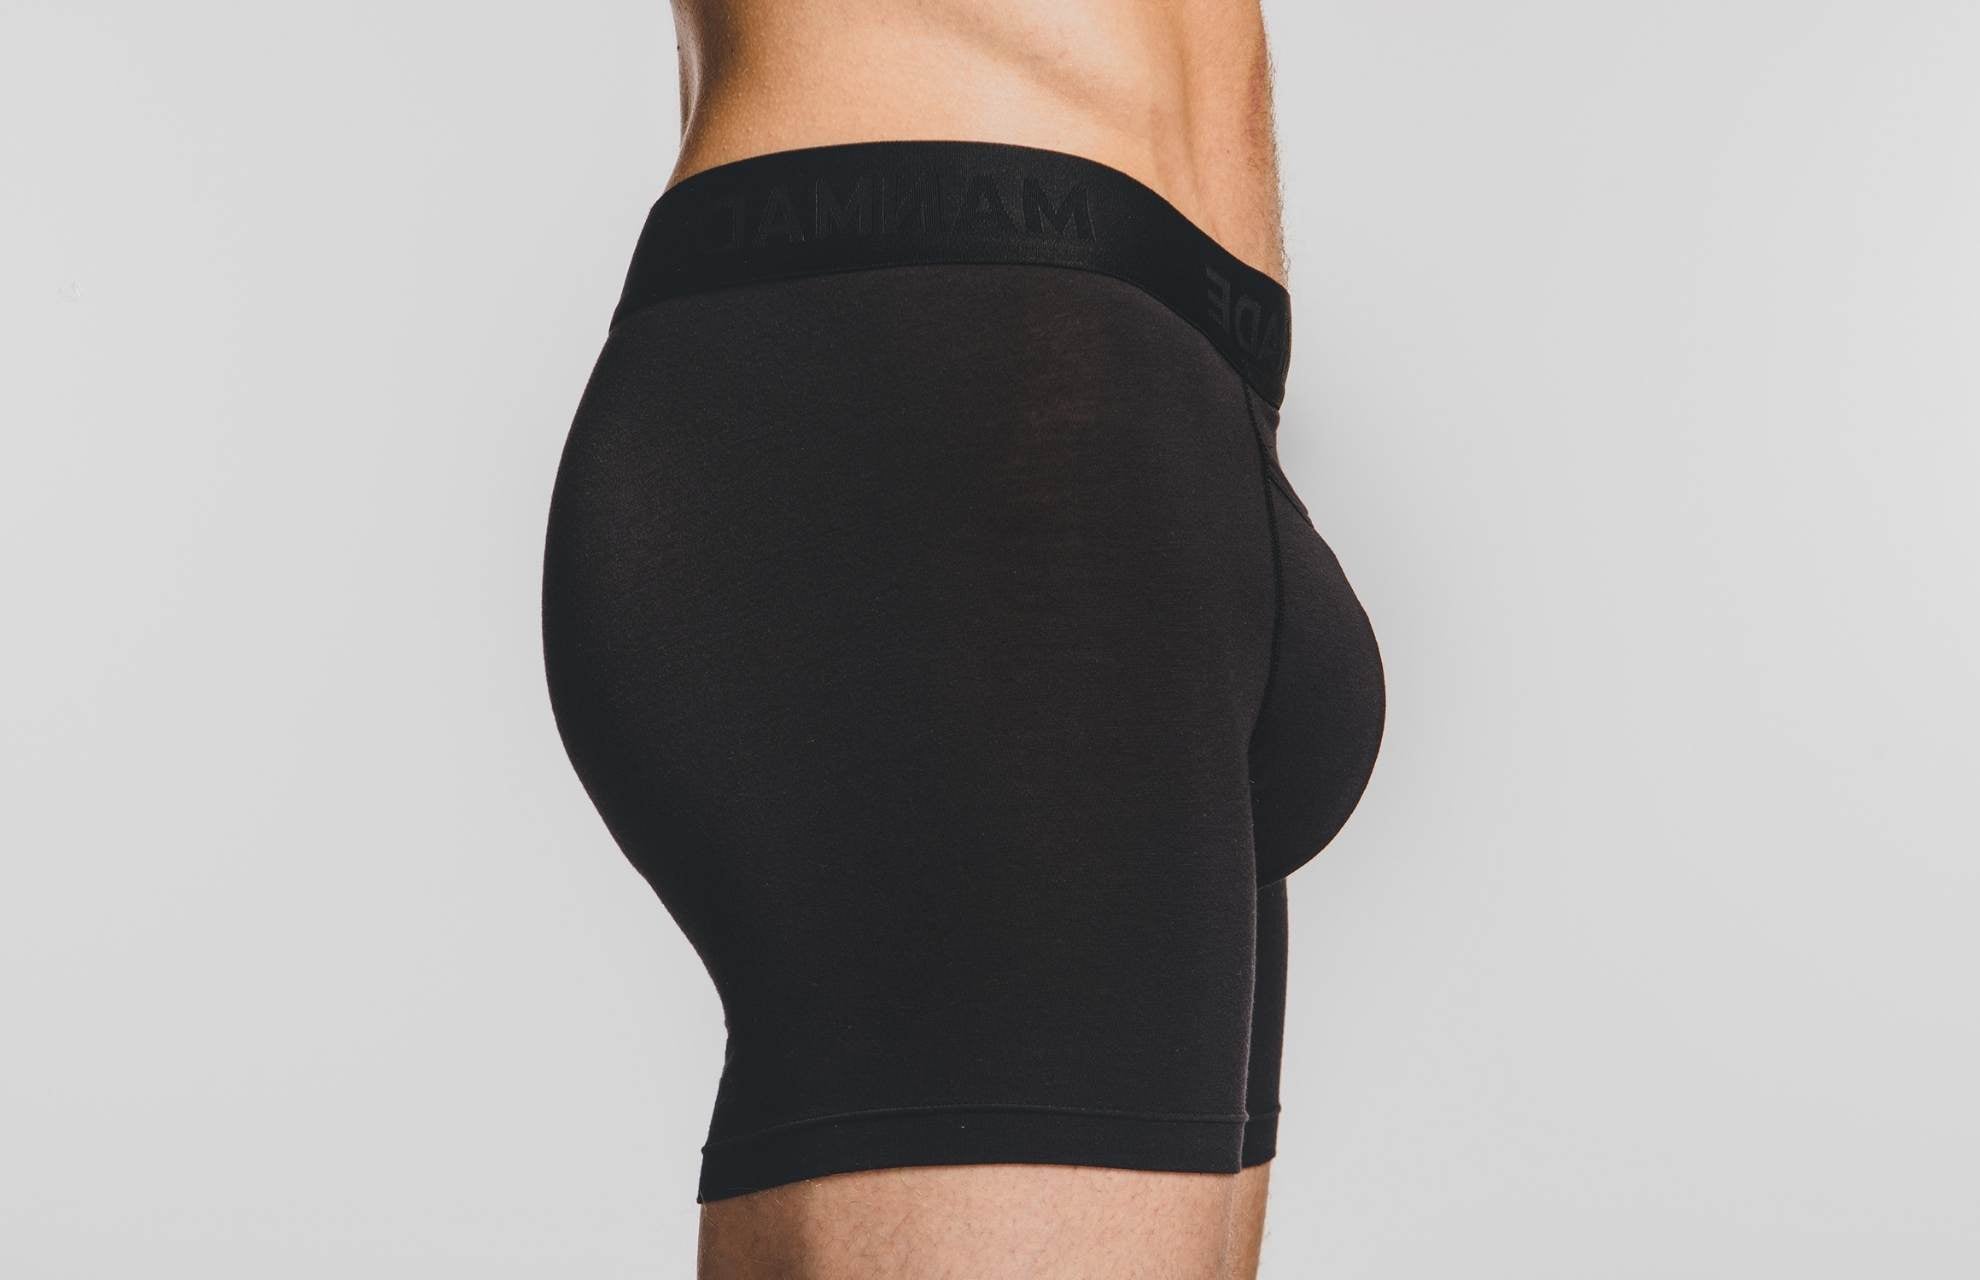 Our underwear has a pouch design that creates extra space and